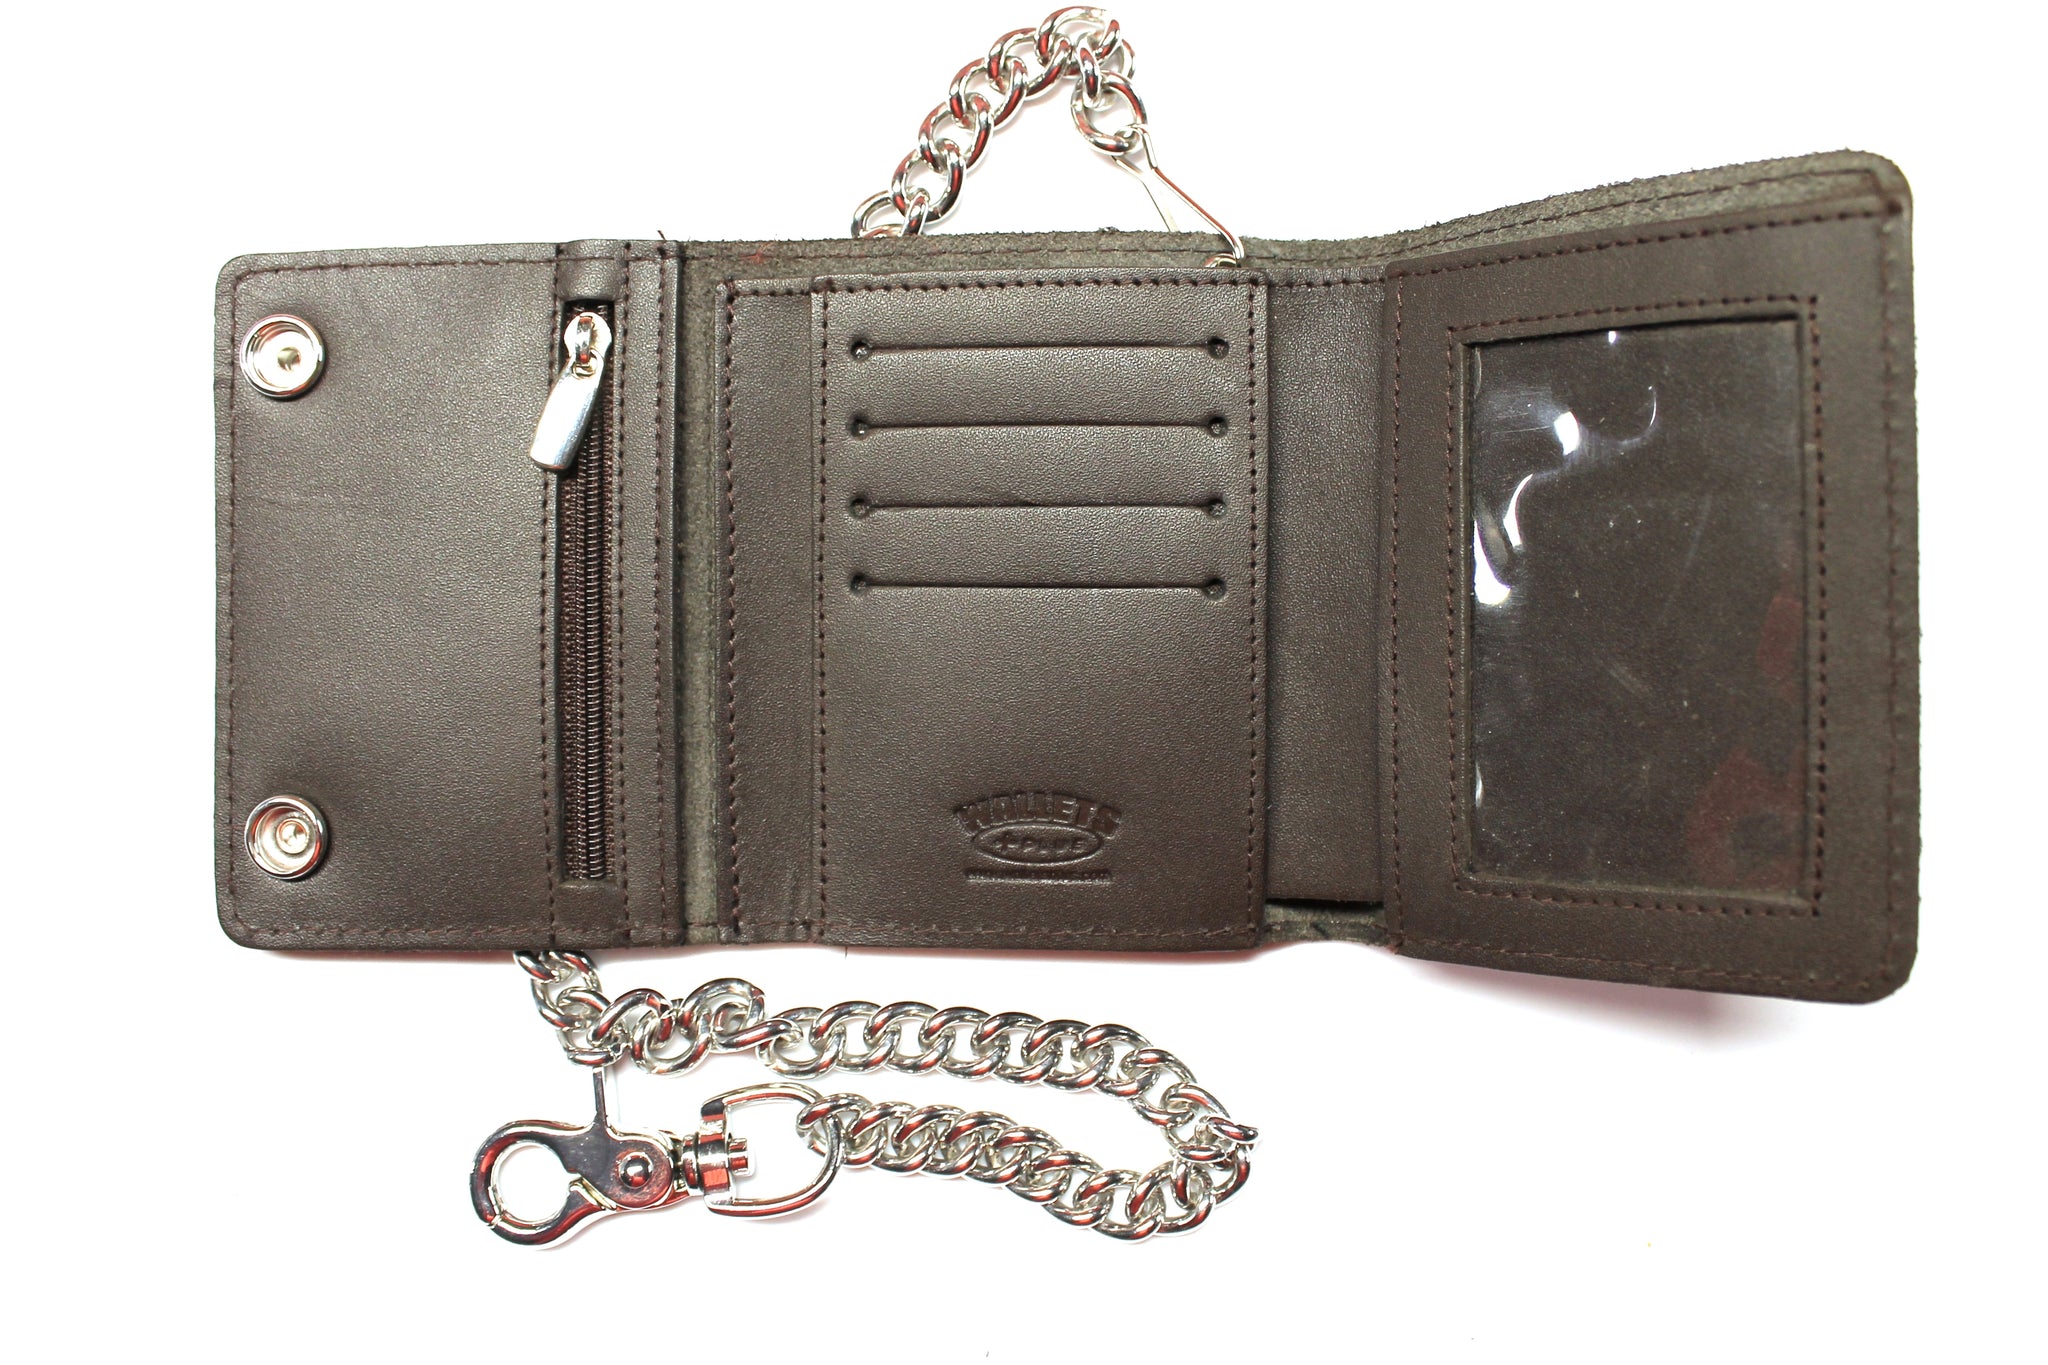 Premium Leather Trifold Biker Wallet with Chain and ID Window - Dark Brown